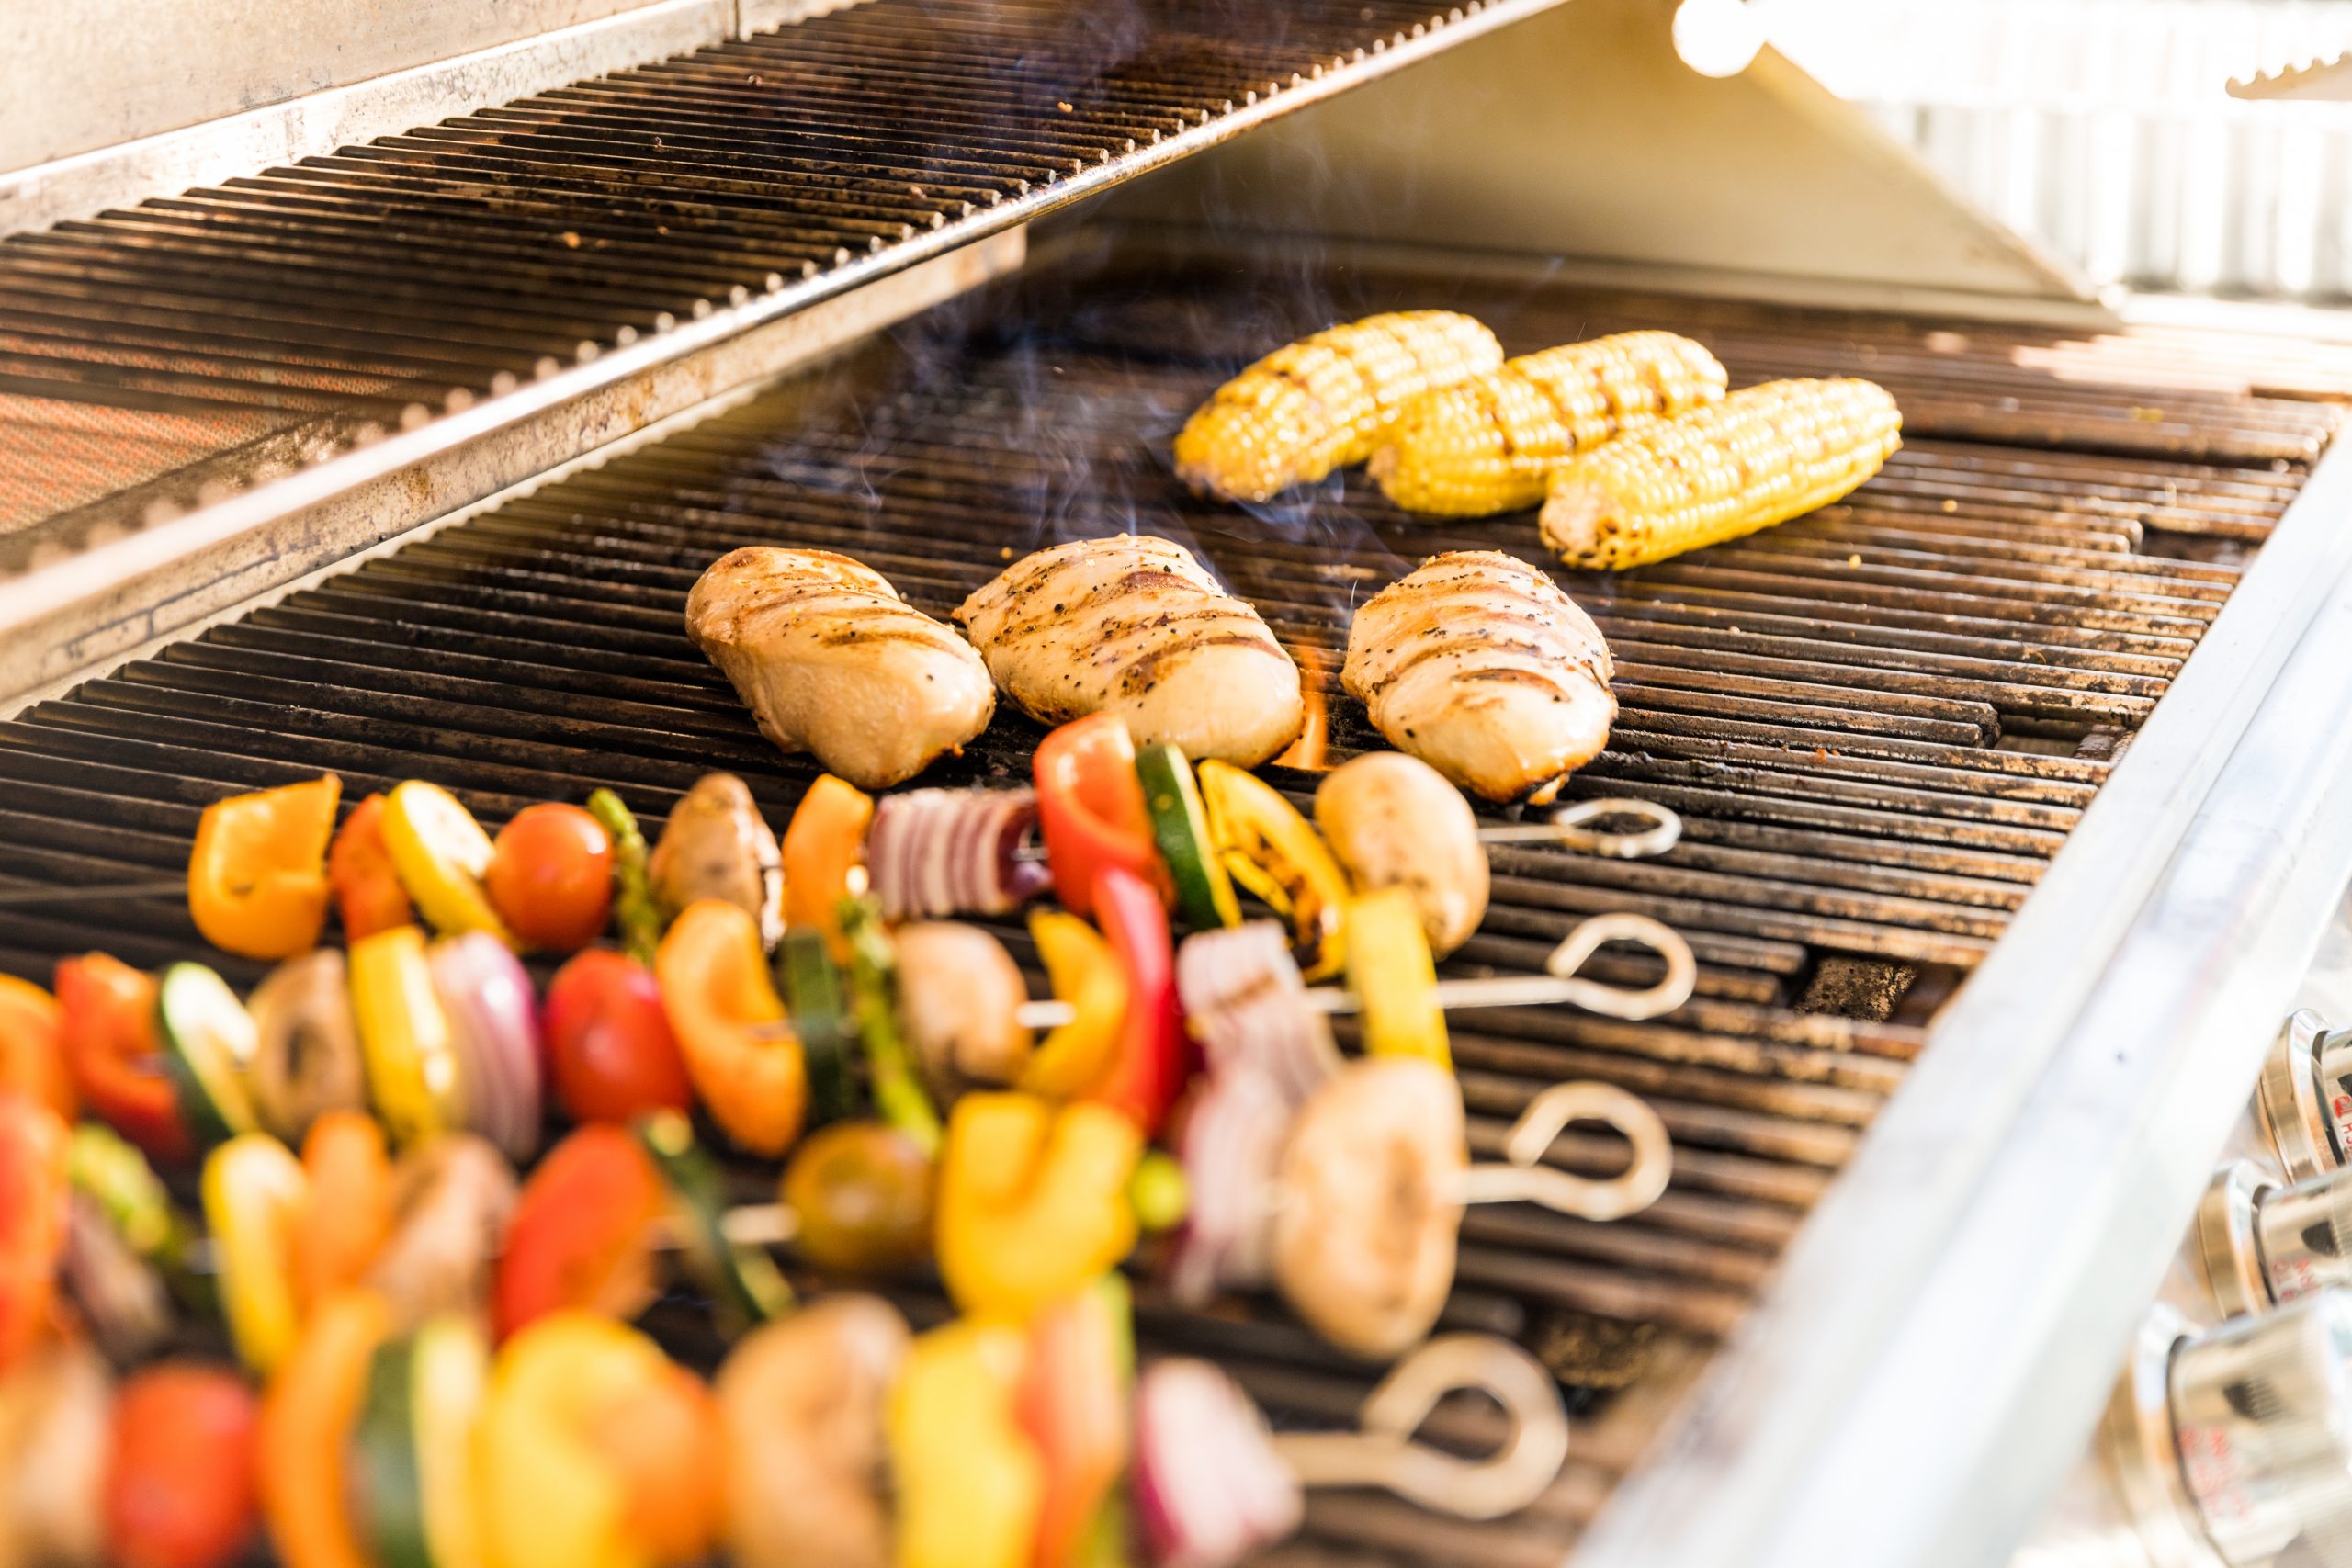 5 Grilling Ideas for Your Next Backyard BBQ Party